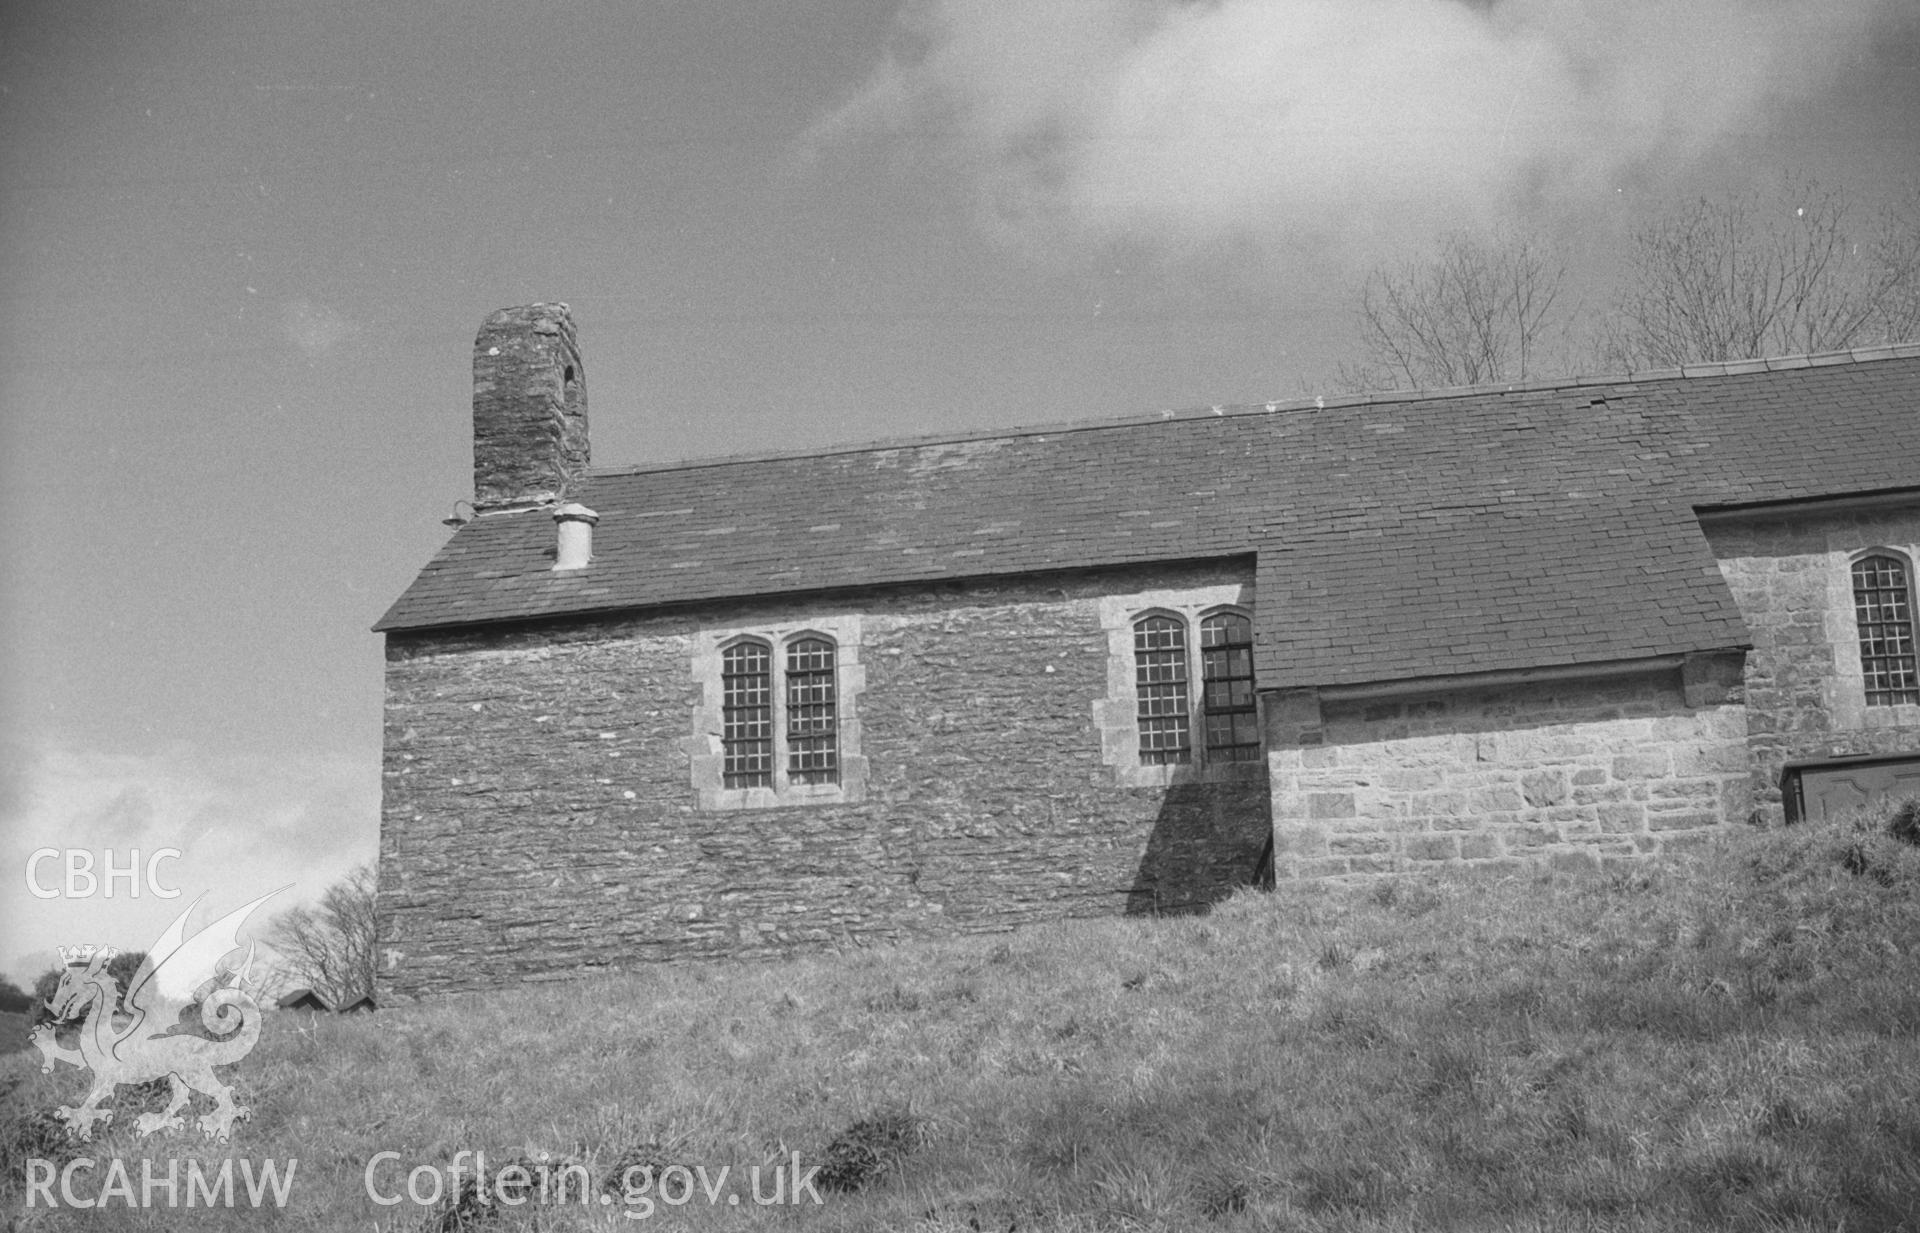 Digital copy of a black and white negative showing exterior view of St. Cynon's Church, Capel Cynon, between Cardigan and Lampeter. Photographed by Arthur O. Chater in April 1966 from Grid Reference SN 383 494, looking north.